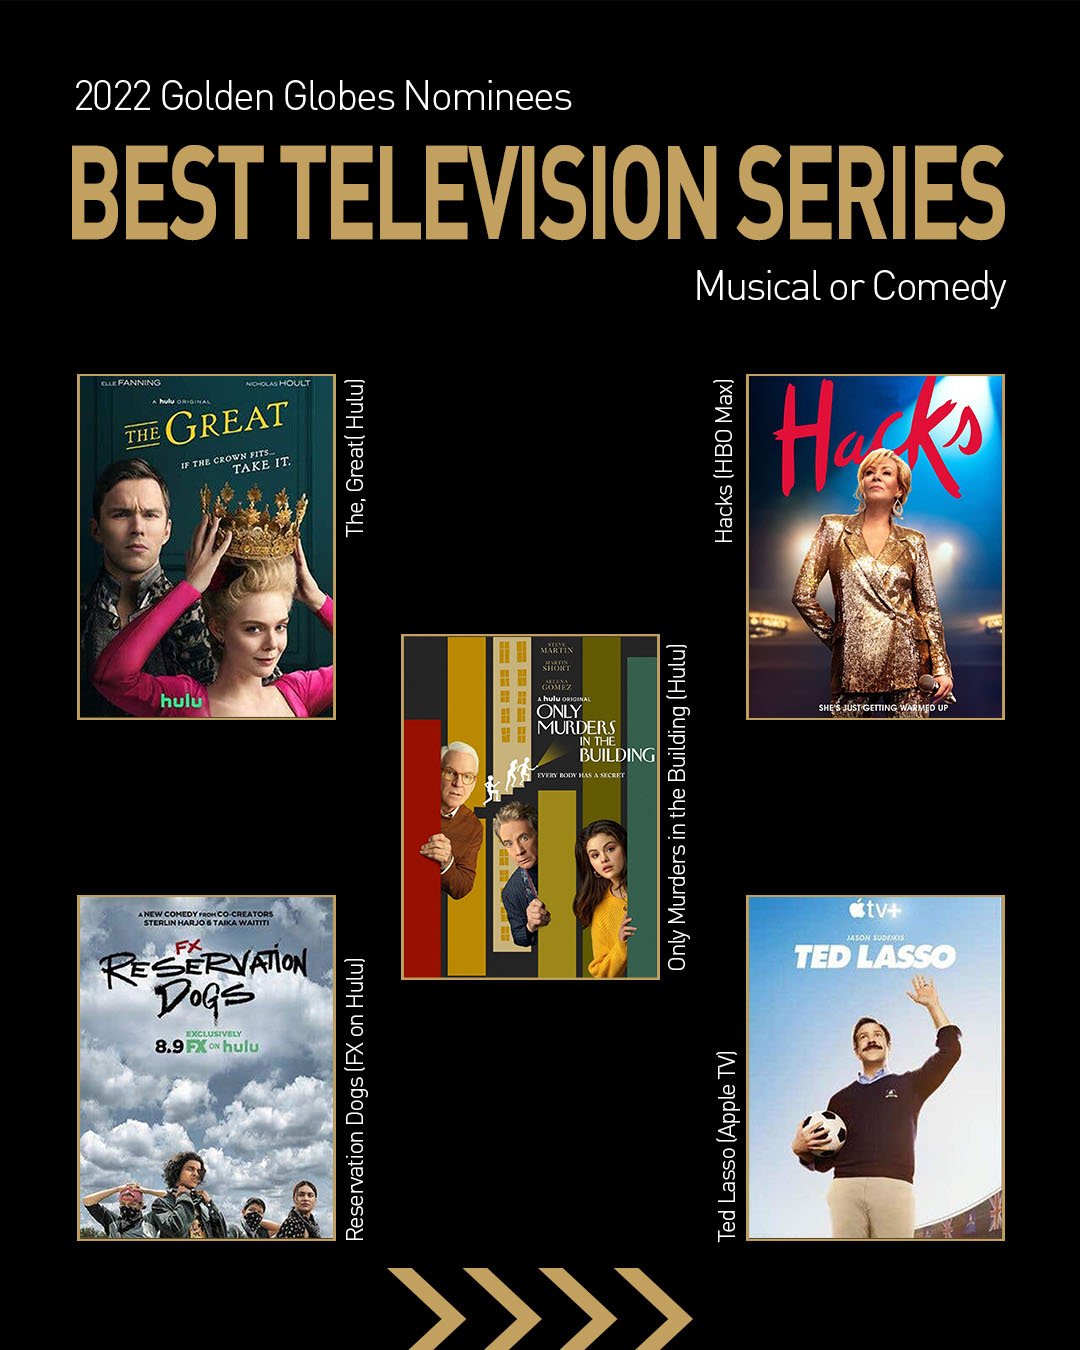 Nominations-IG Posts1A - Best Television Series - Musical or Comedy.jpg